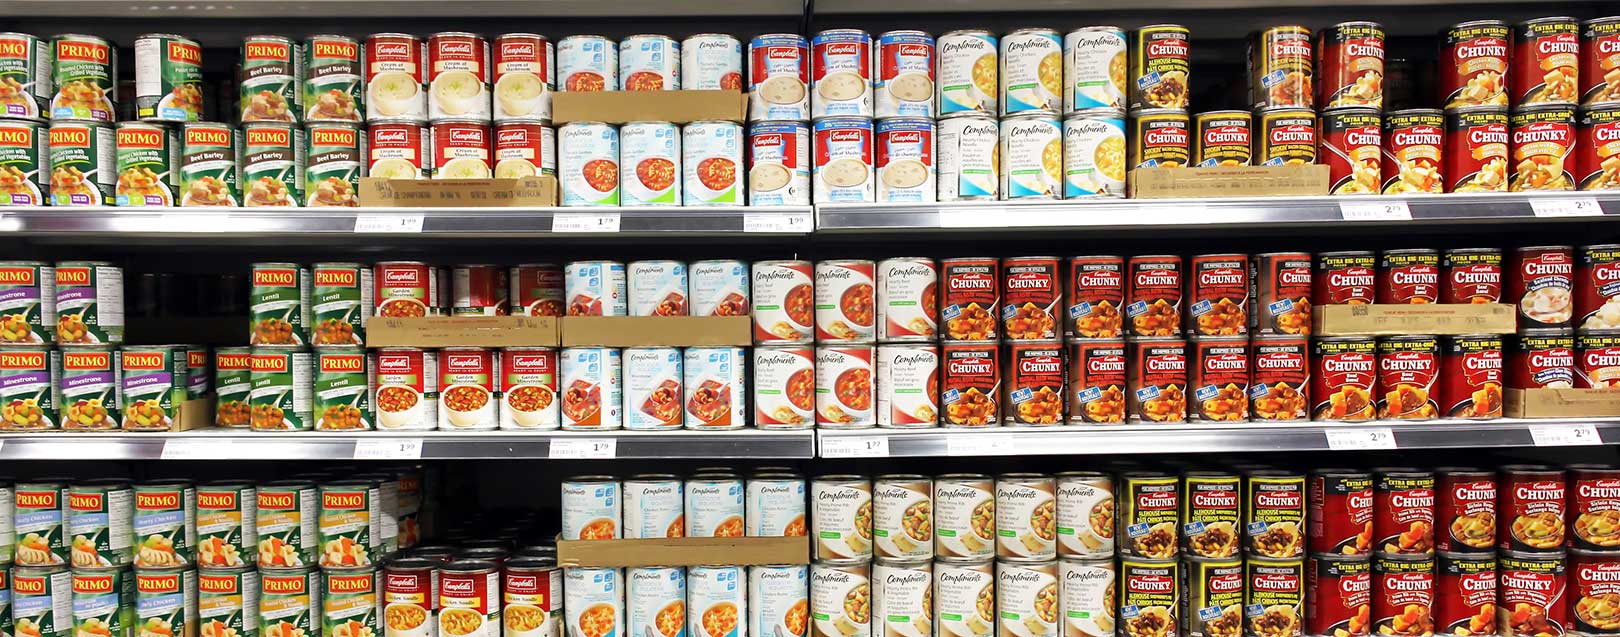 CAIT urges Govt to exempt food items with registered trademark from GST